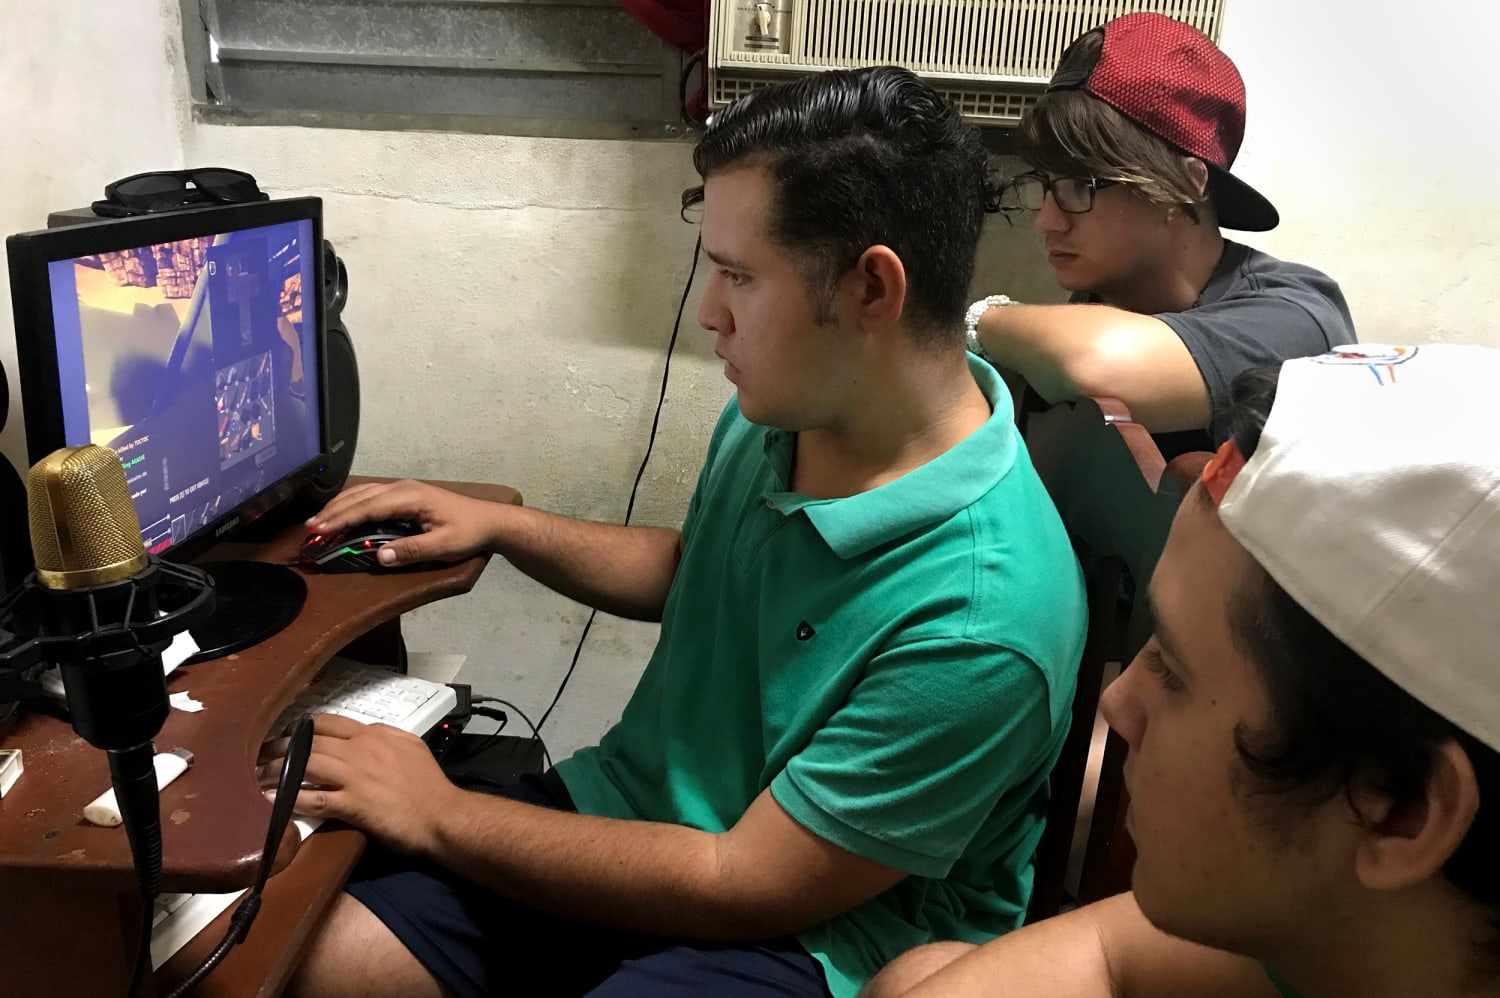 In Cuba, gamers lament what they see as the end of the islands underground network